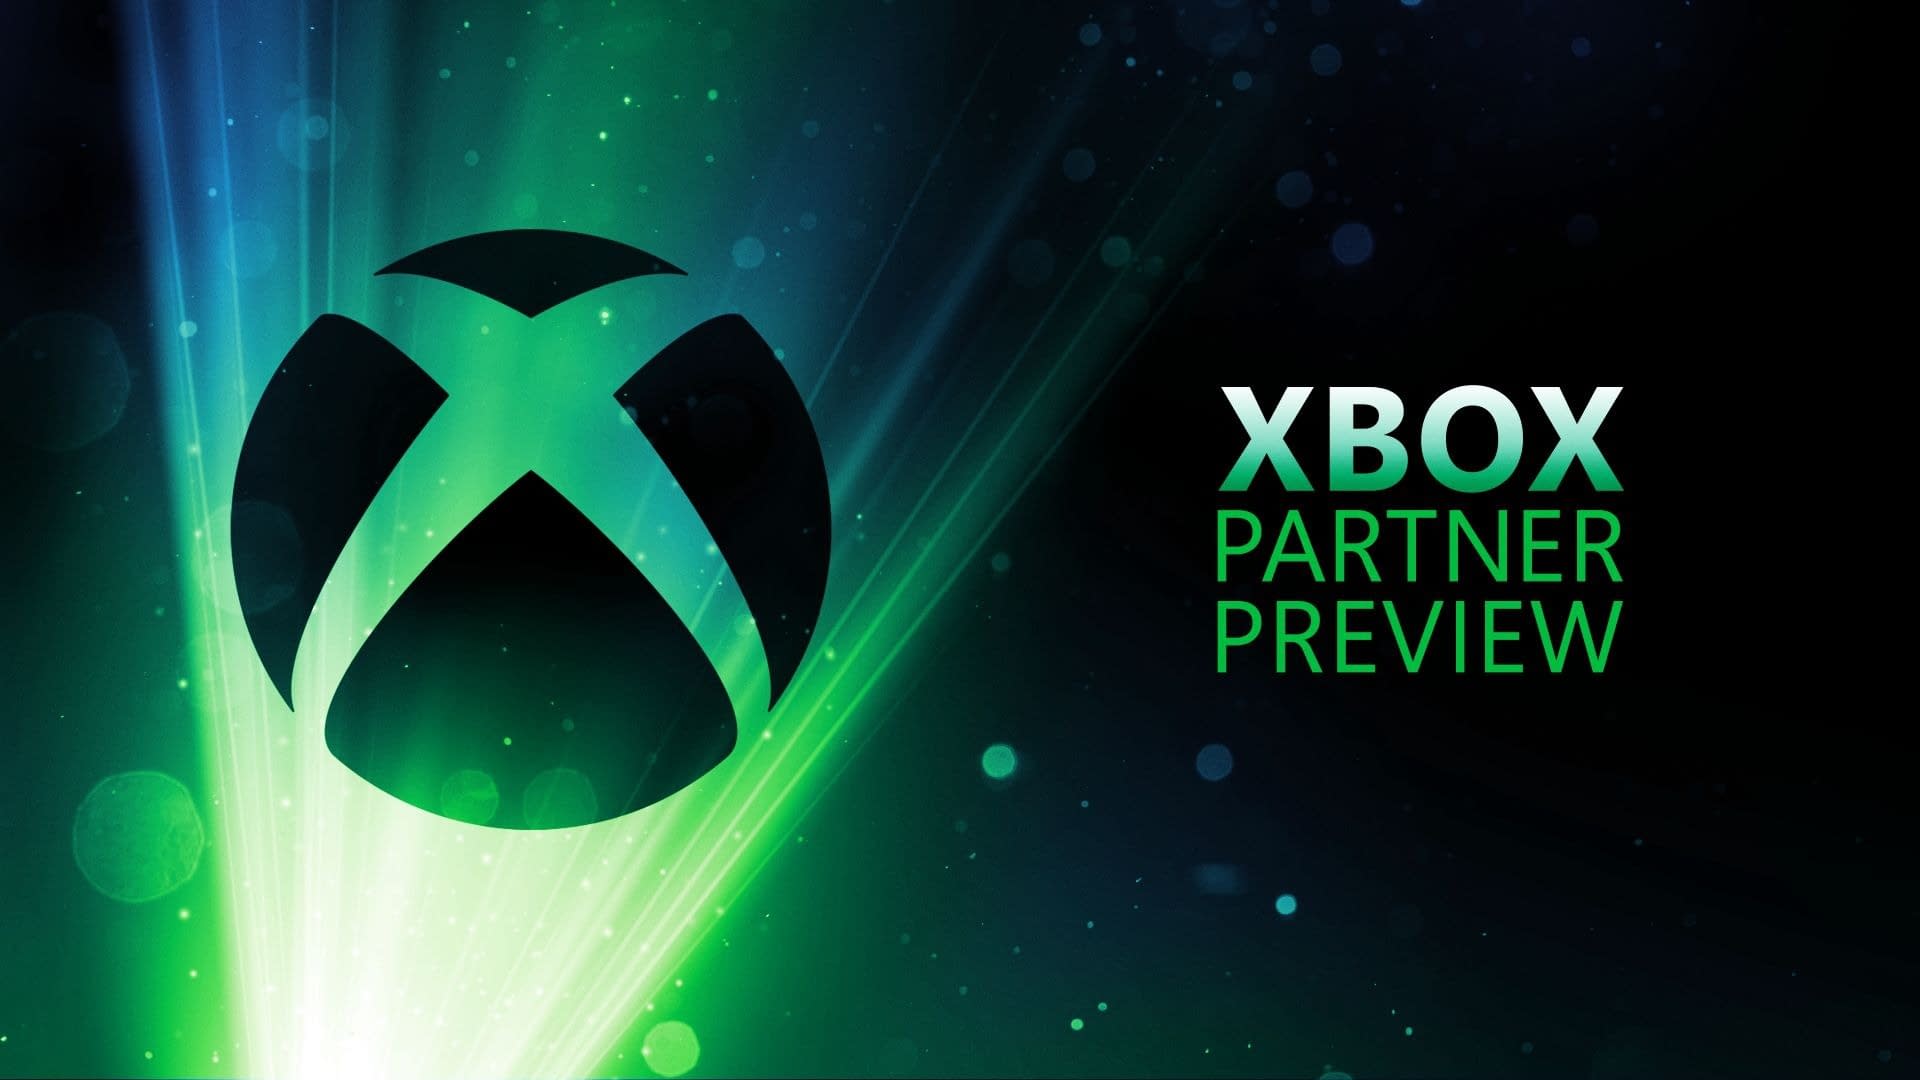 Xbox Partner Adlı Event Announcement: New Games From Independent Teams